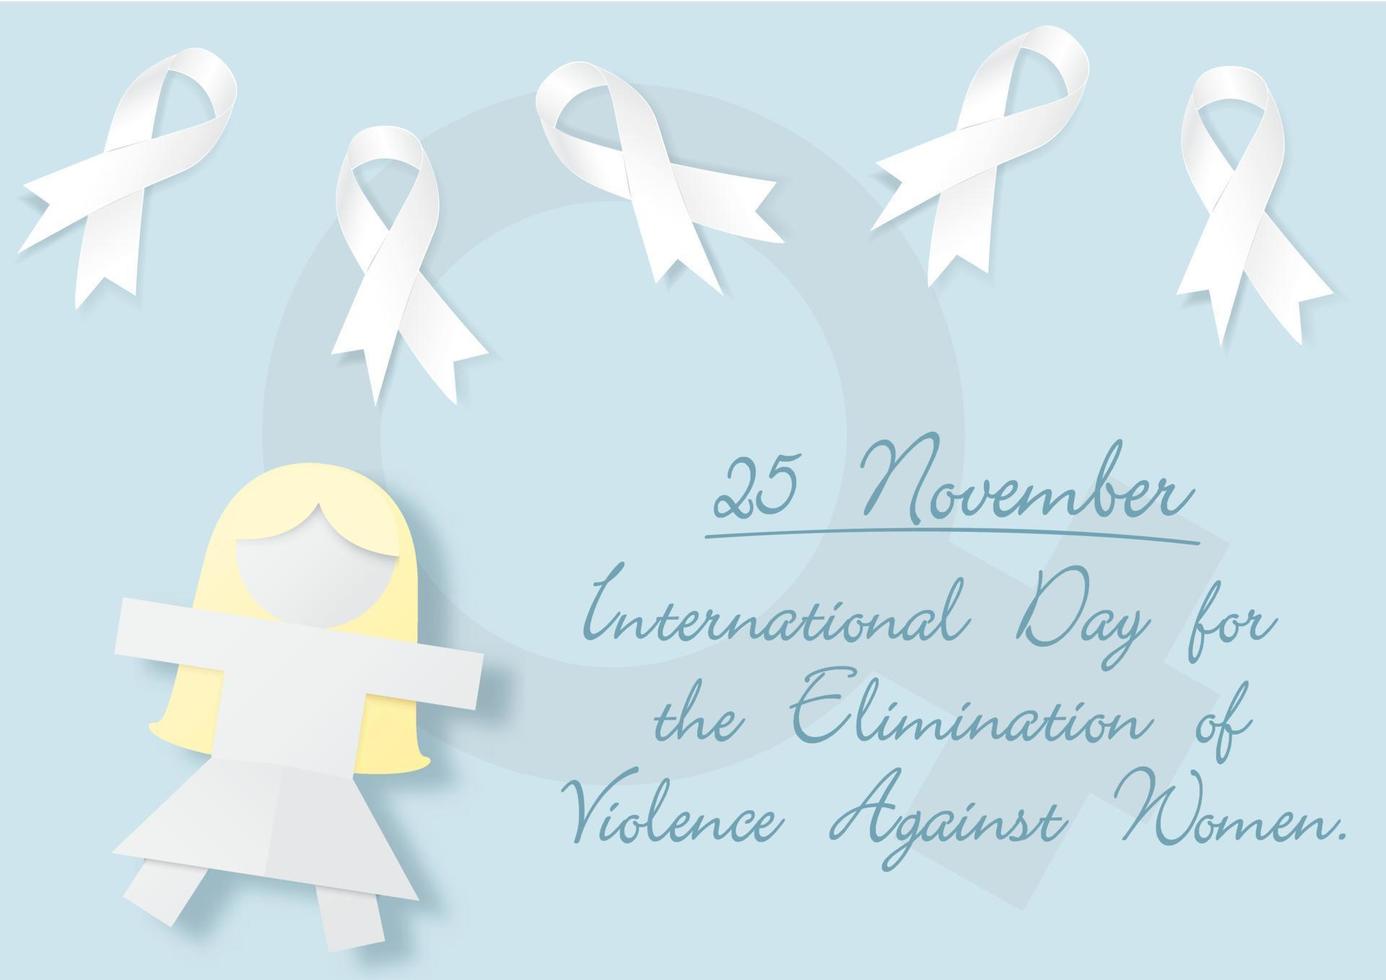 White ribbons with woman or girl in paper cut style and the day and name of the Elimination violence against women on woman symbol and light blue background. All in vector design.